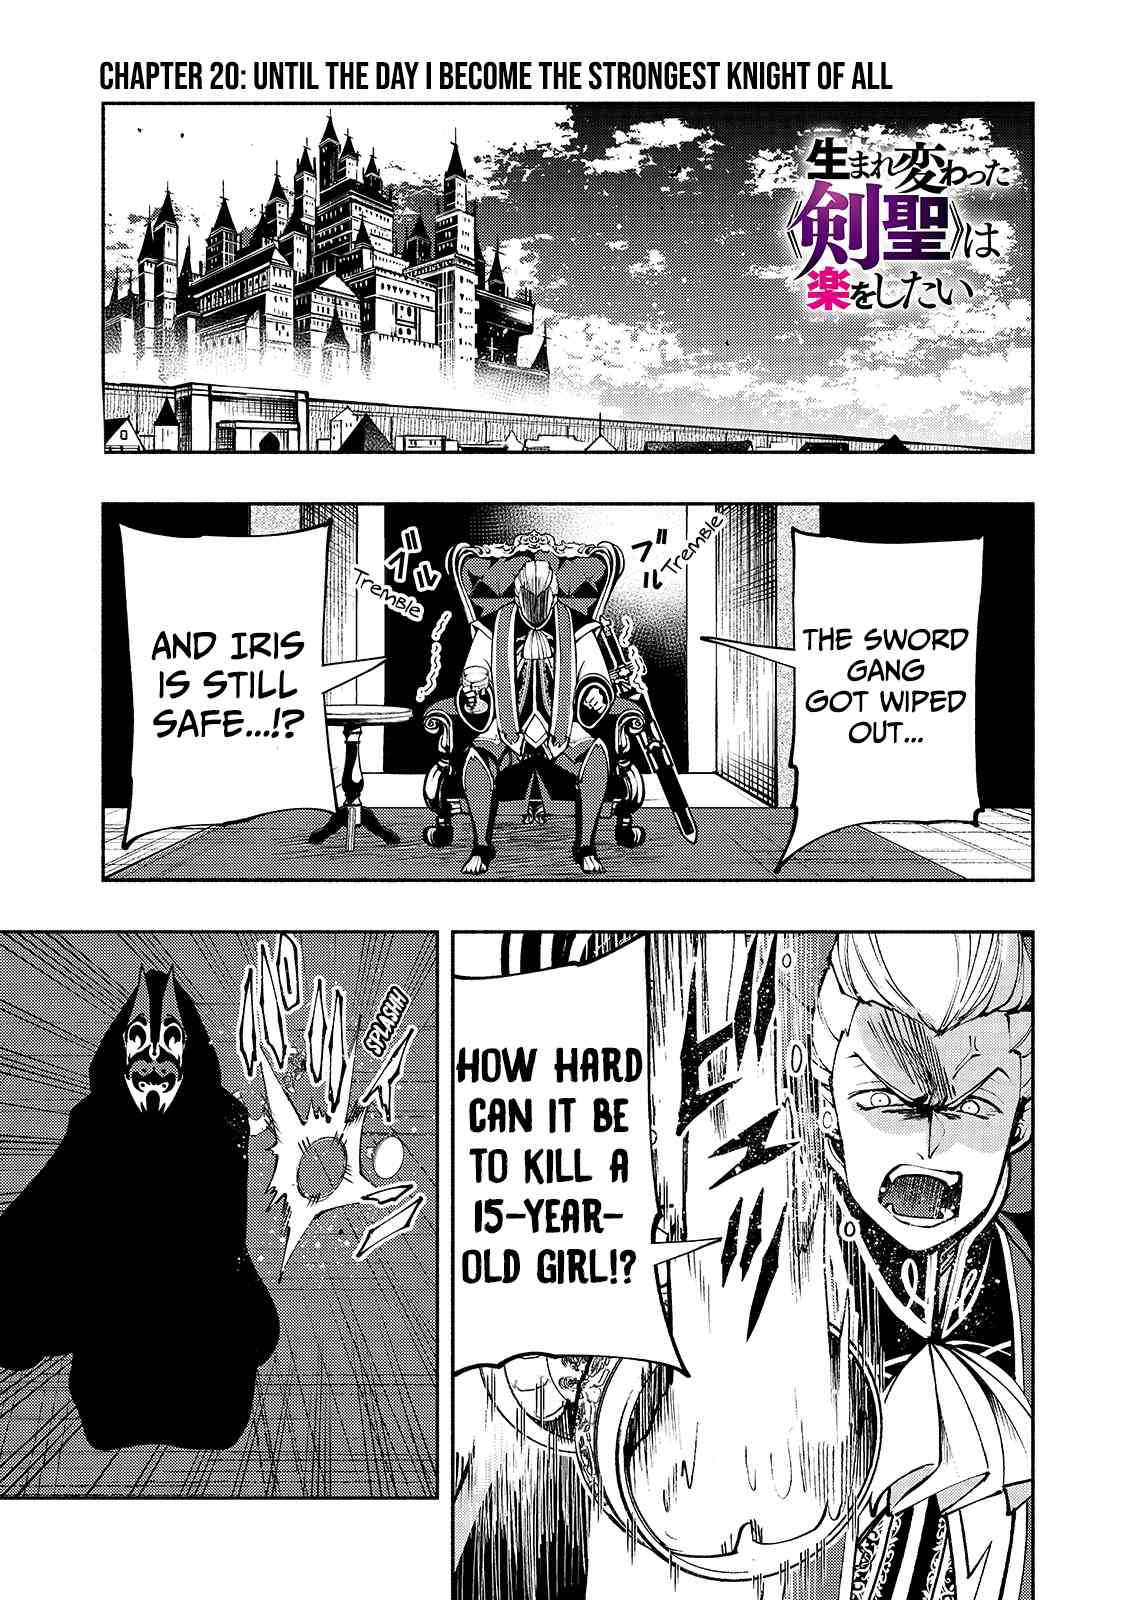 The Reincarnated 「Sword Saint」 Wants To Take It Easy - Page 2